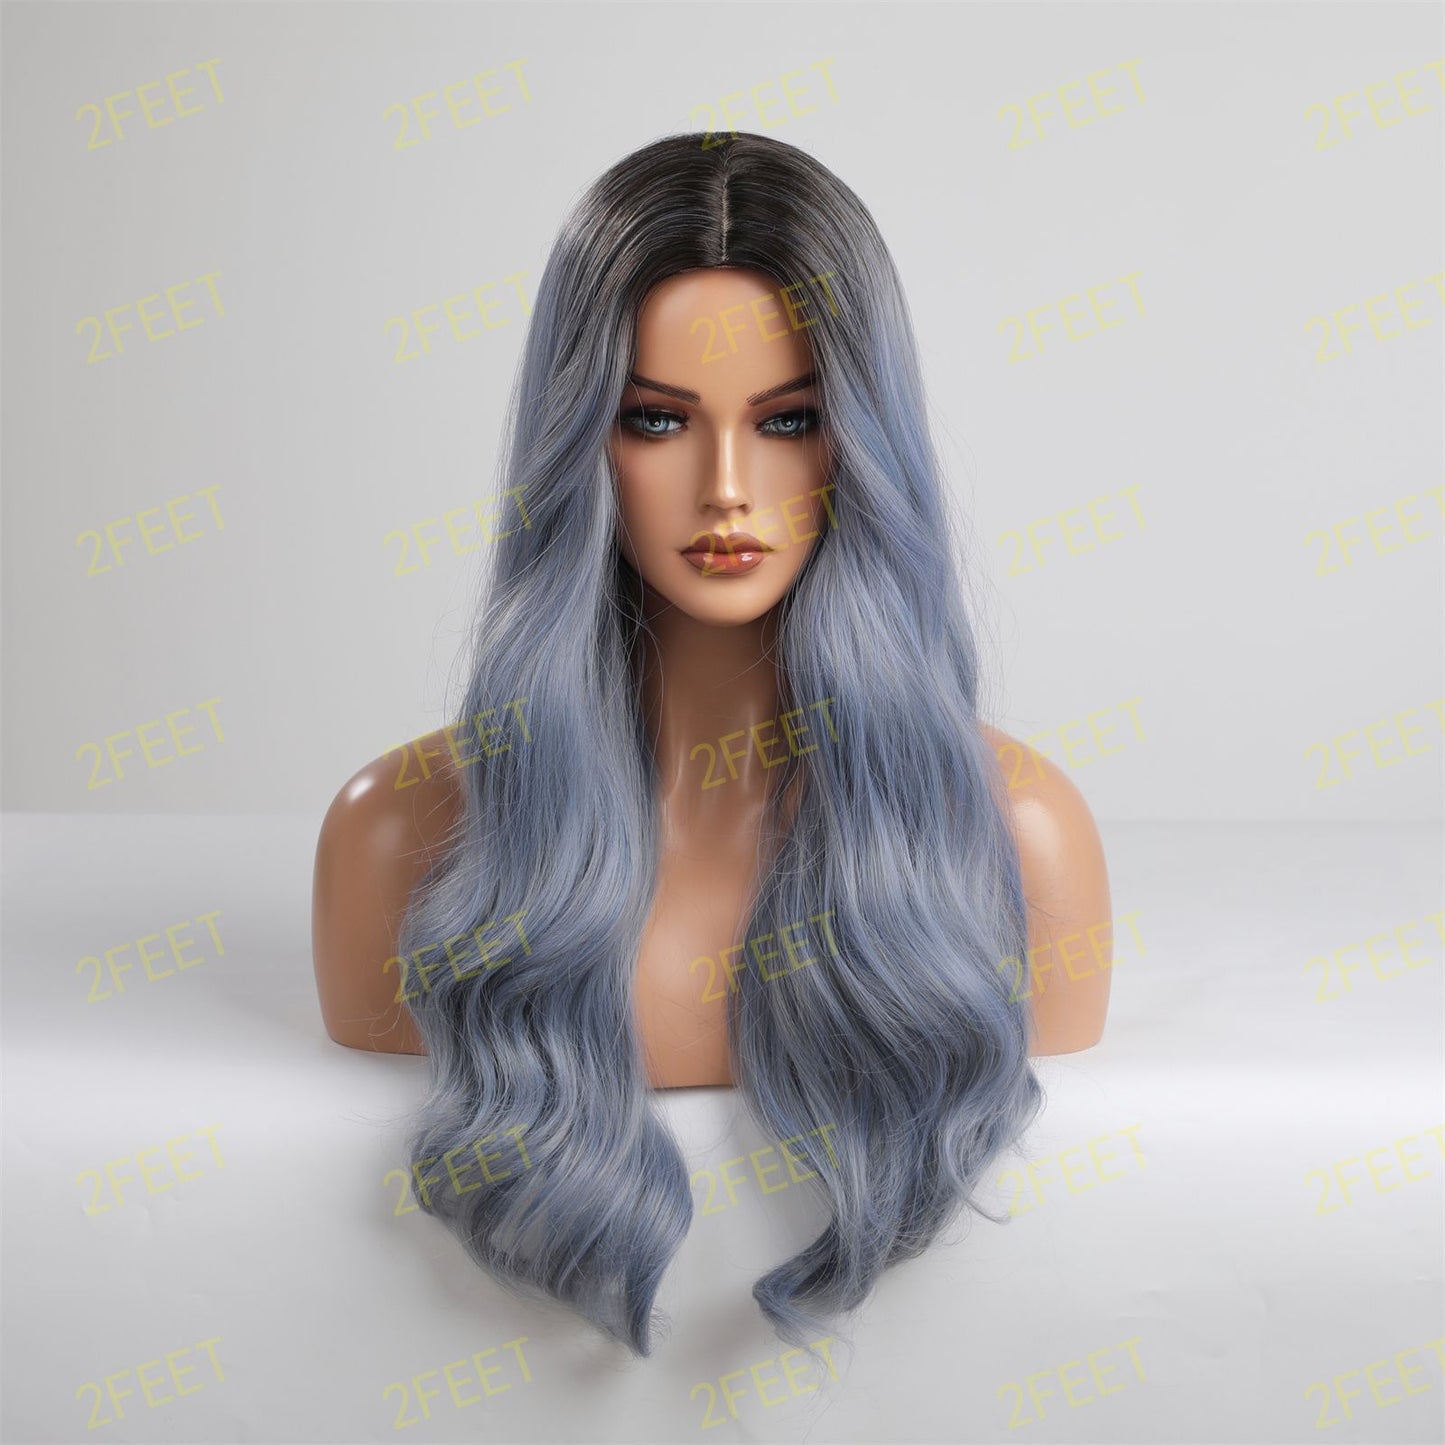 NO-15 Long Curly Haze Blue Wigs Synthetic Wigs Women's Wigs for Daily or Cosplay Use LC8067-1